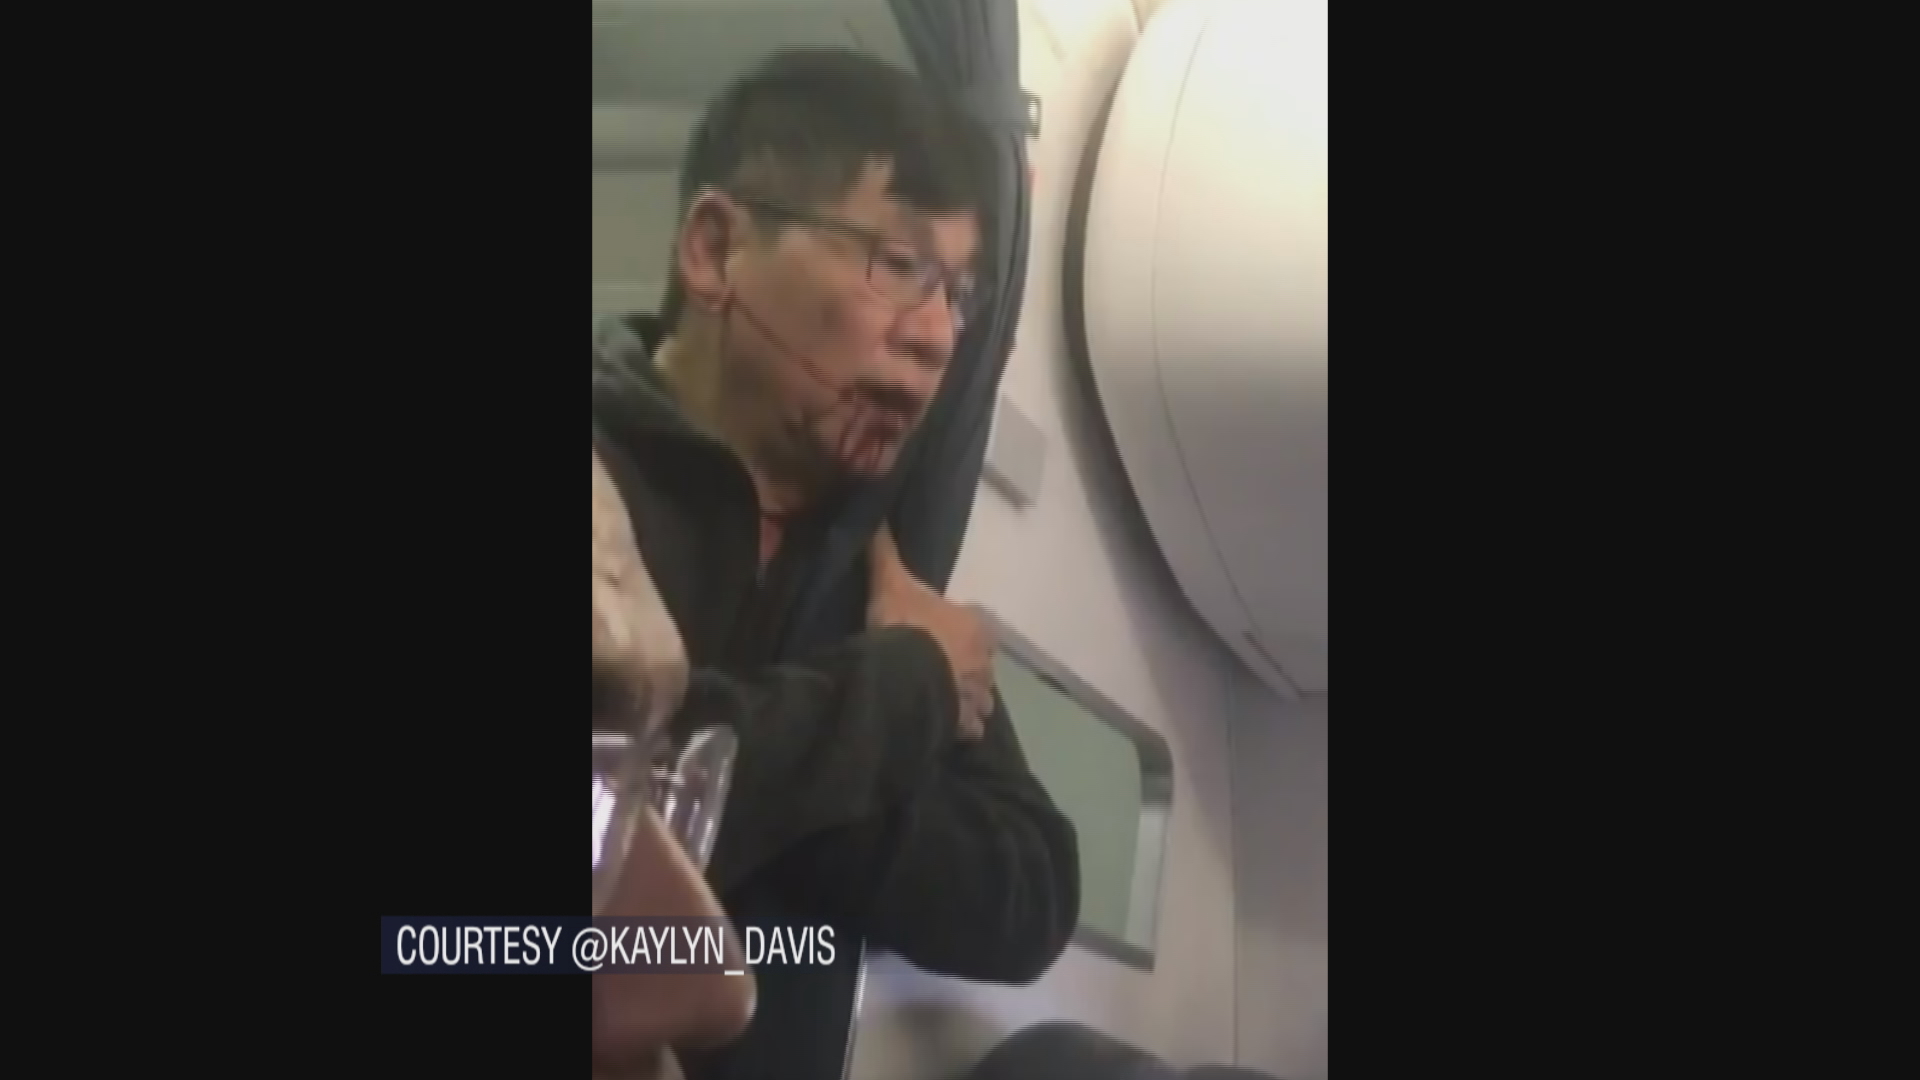 A photo captured on board United Flight 3411 shows Dr. David Dao with blood streaming down his face. (Courtesy of @Kaylyn_Davis)